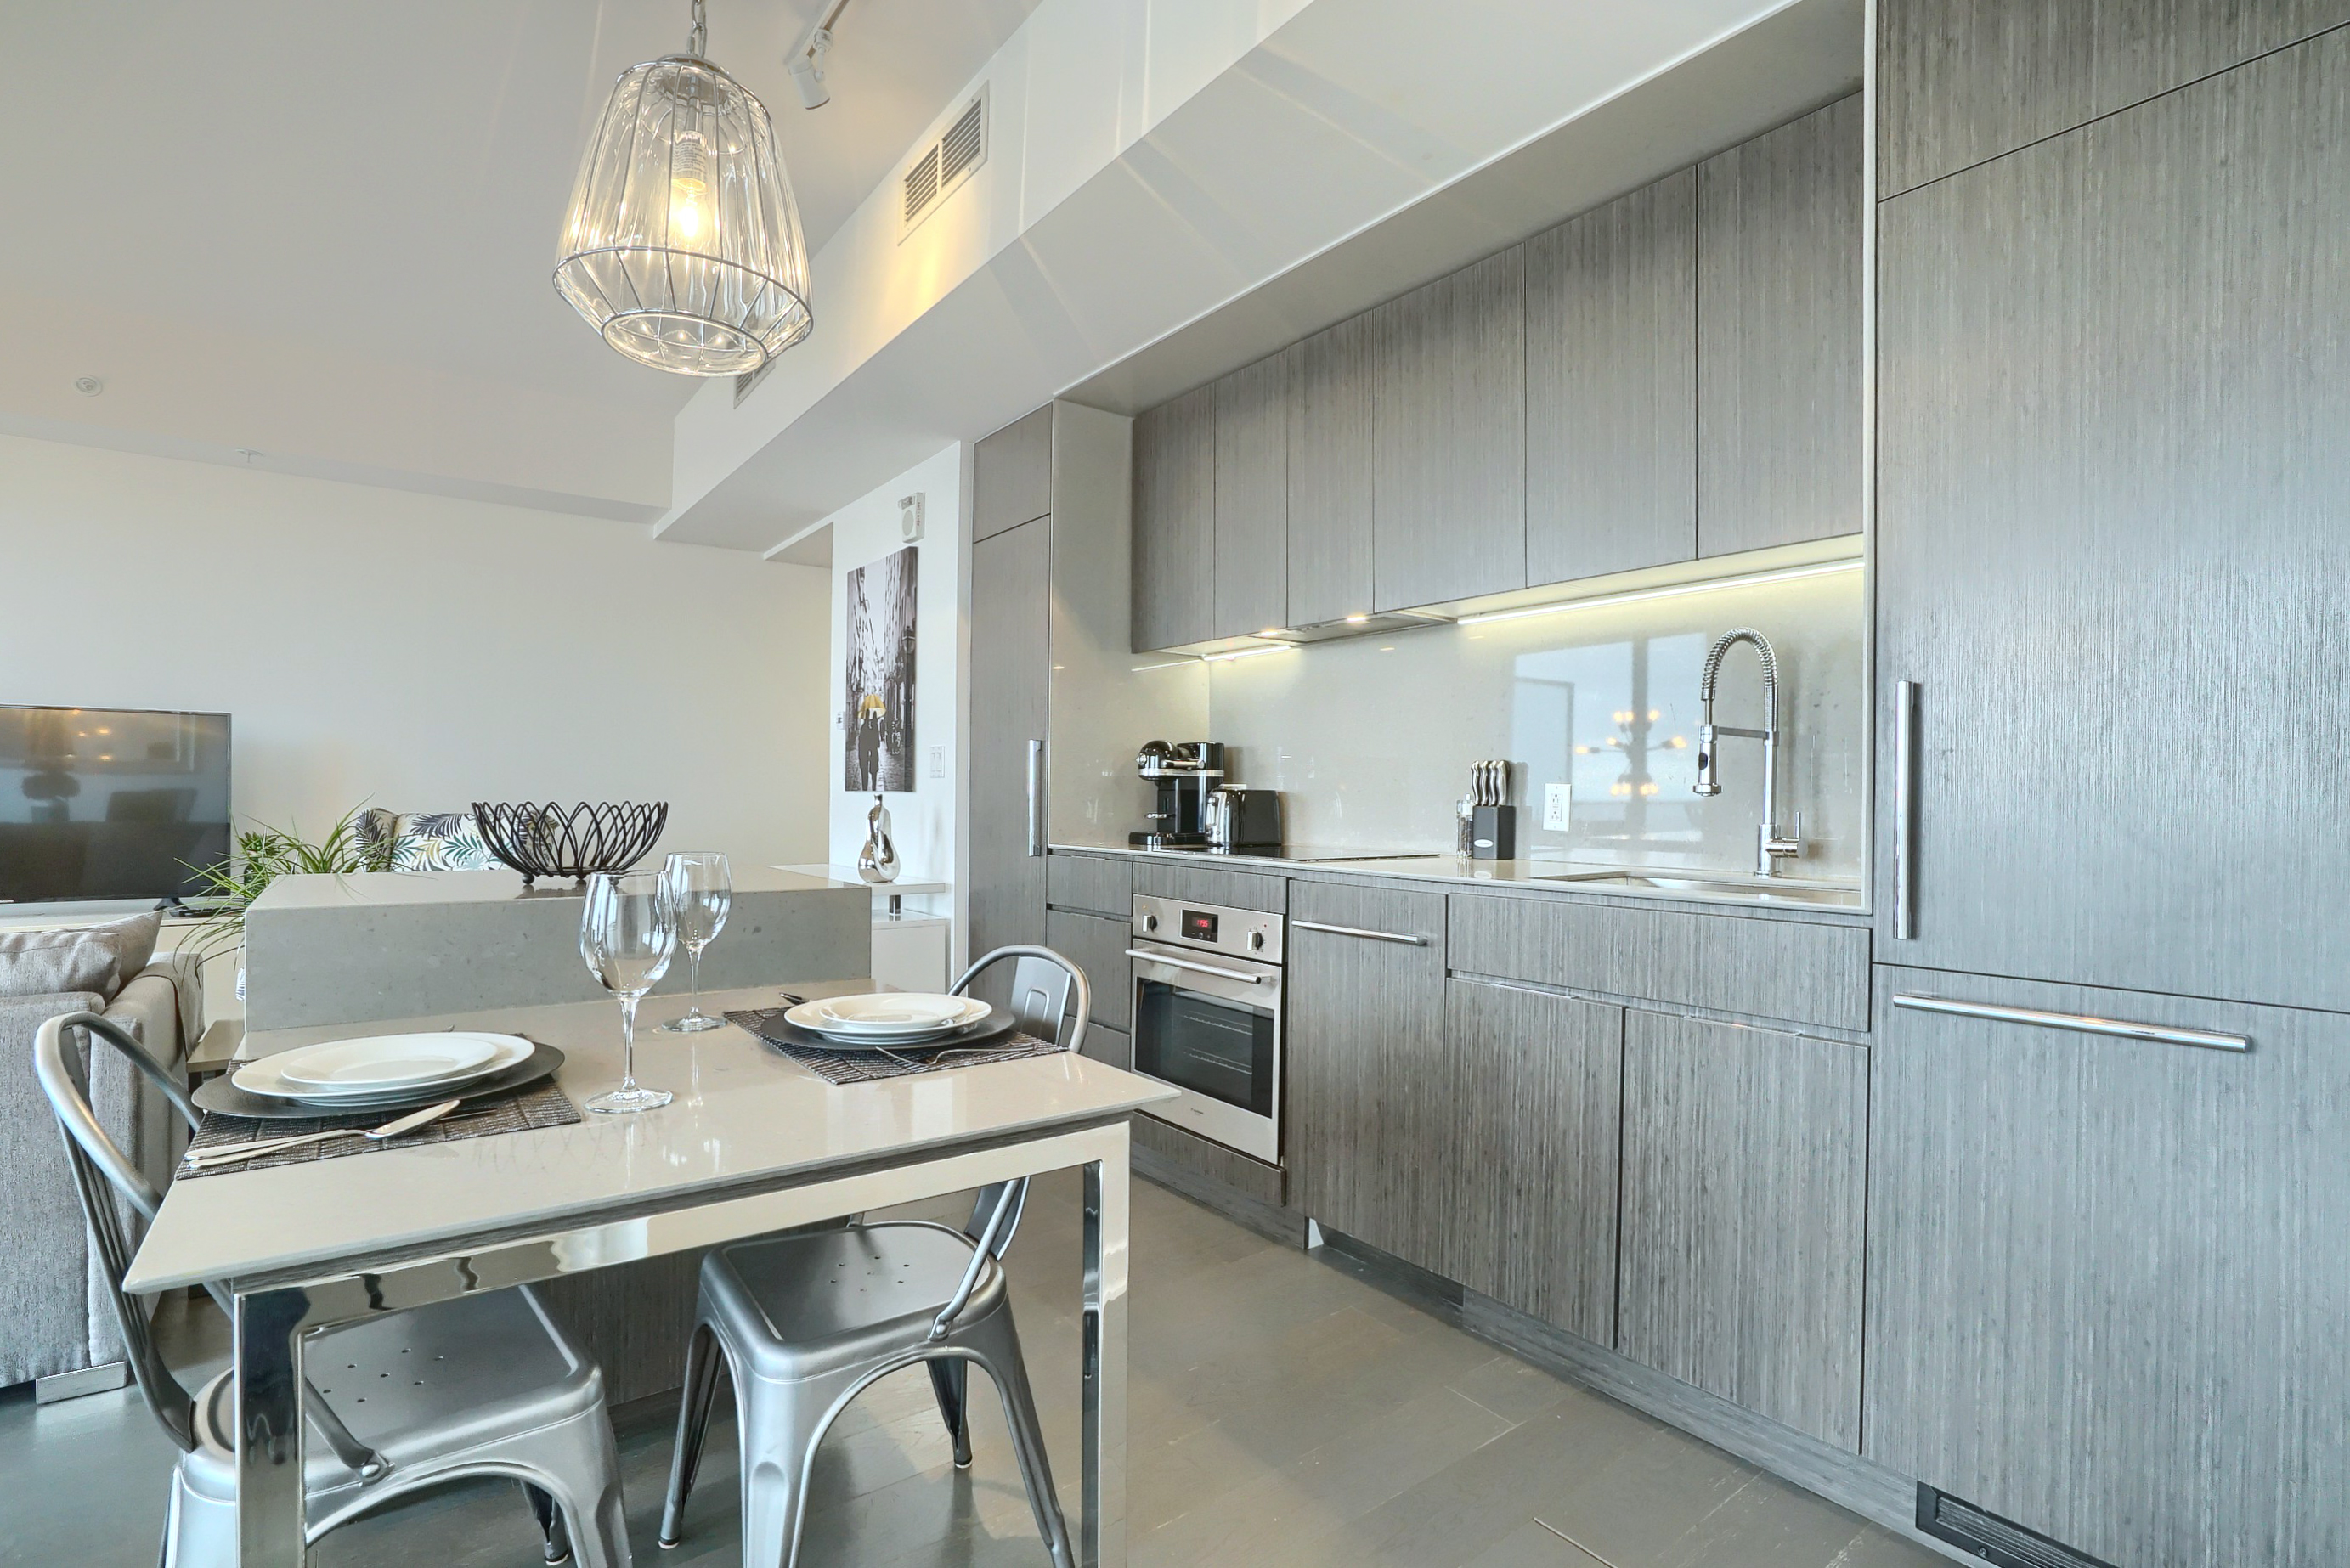 View into the modern, sleek, kitchen. Two seat kitchenette table beautiful decorated with designer placemats, white dishes, tall wine glasses and stainless silverware. Kitchen is bright and spacious - make this furnished condo for rent in montreal perfect